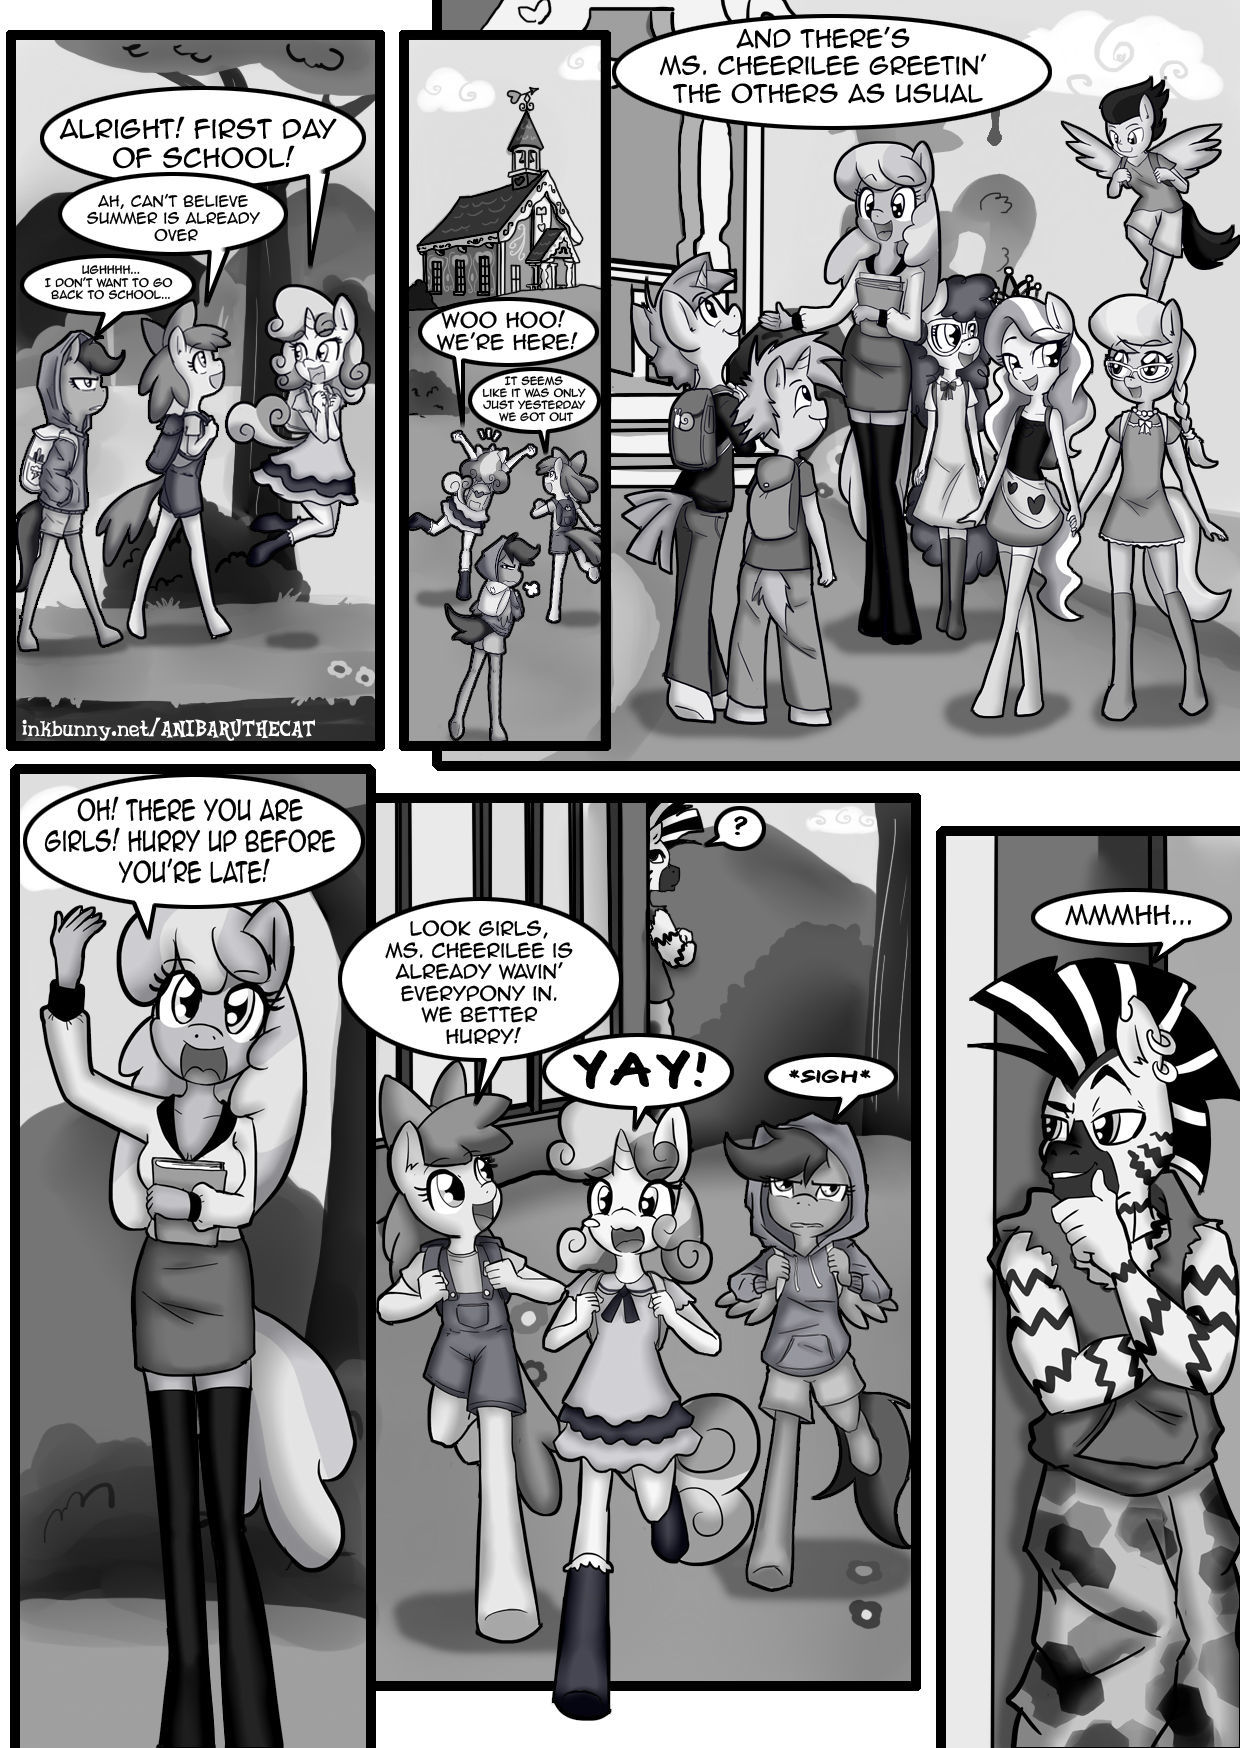 Gang Bangerz My little Pony by AnibarutheCat page 2